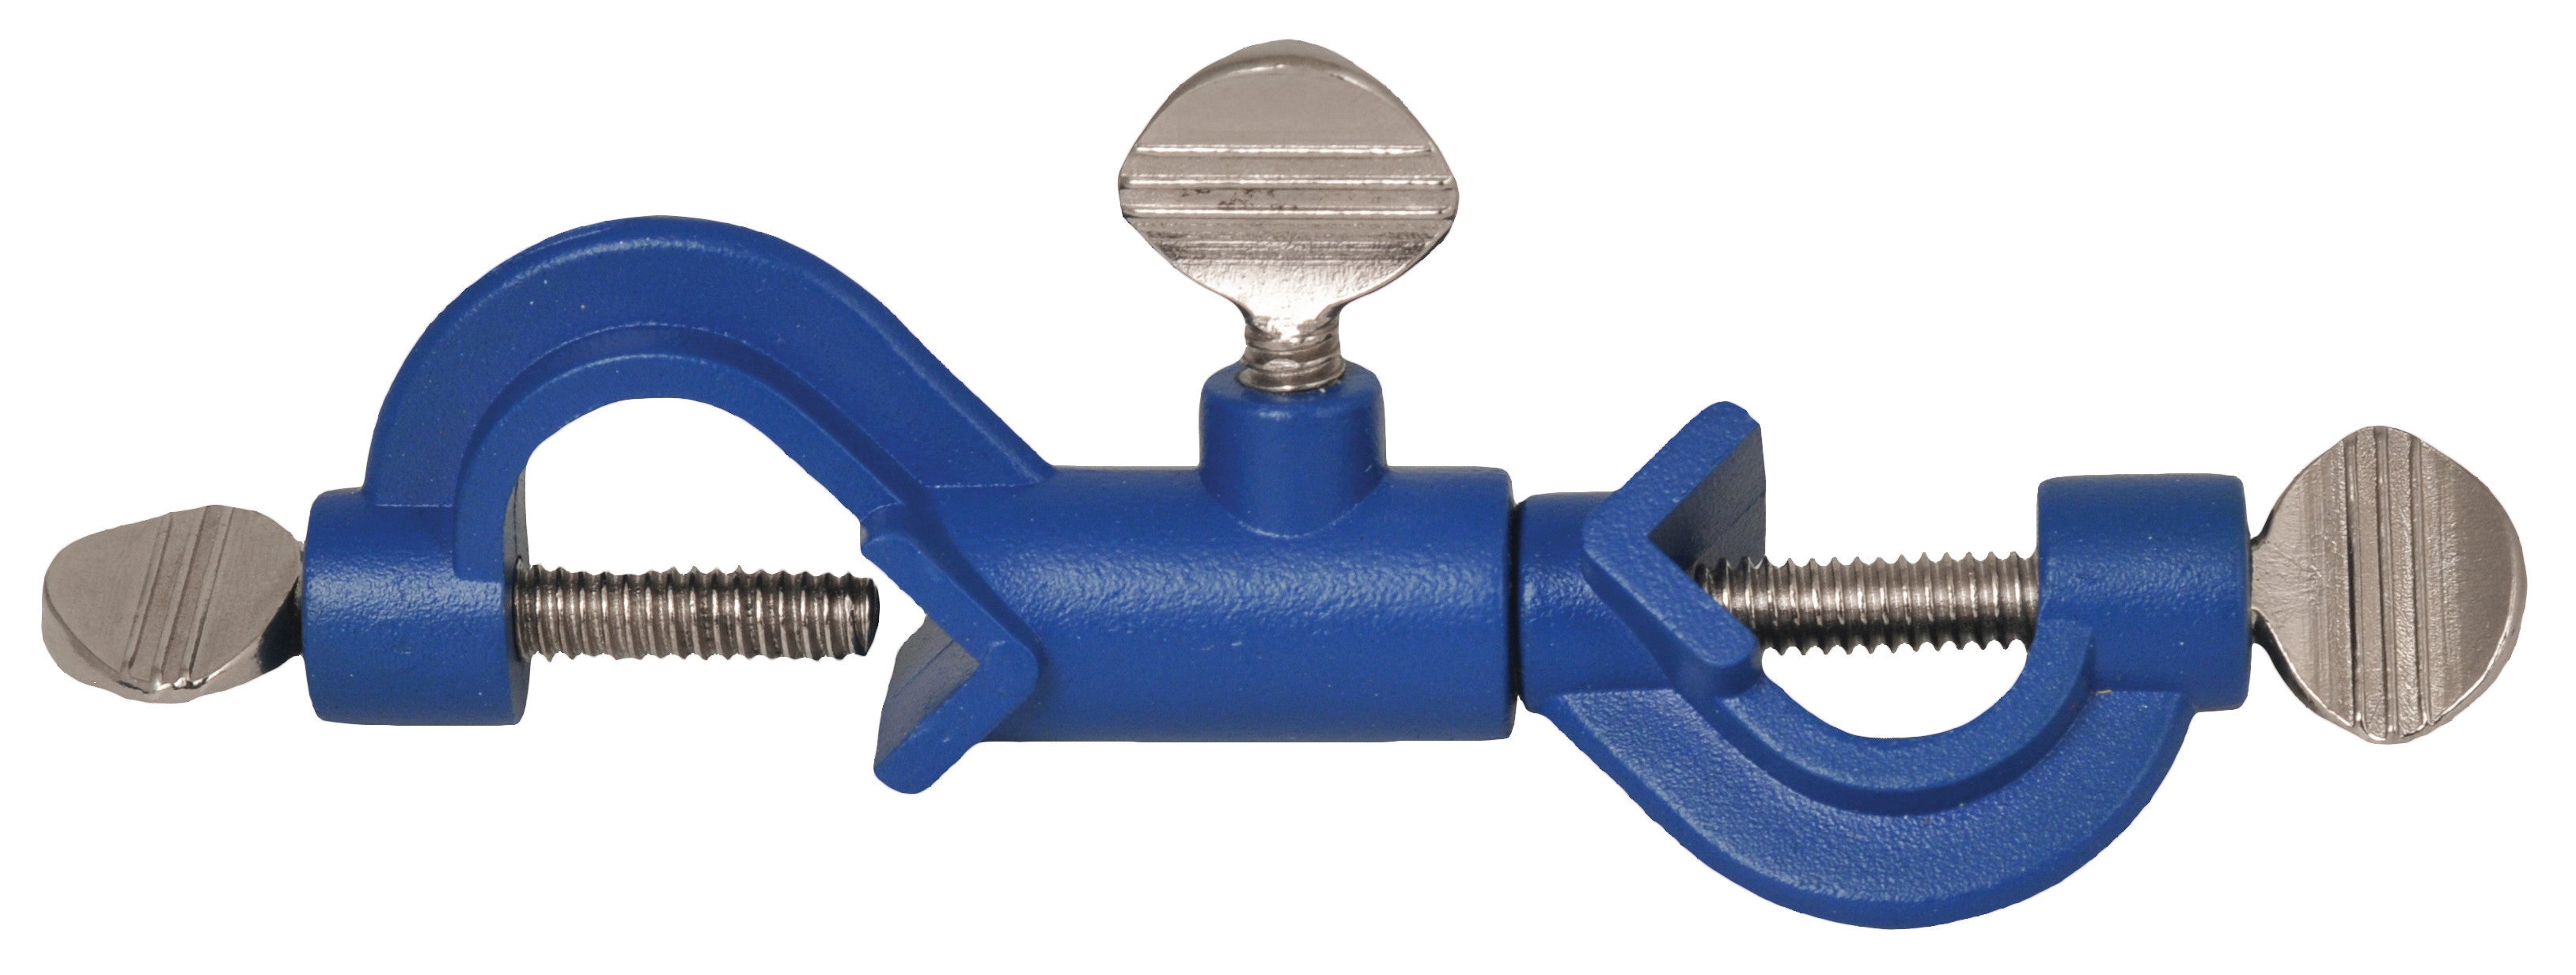 Swivel Boss Head Clamp Holder for Rods up to 3/4" (19mm) in Diameter - Adjusts to Any Angle (360 Degree Rotation)